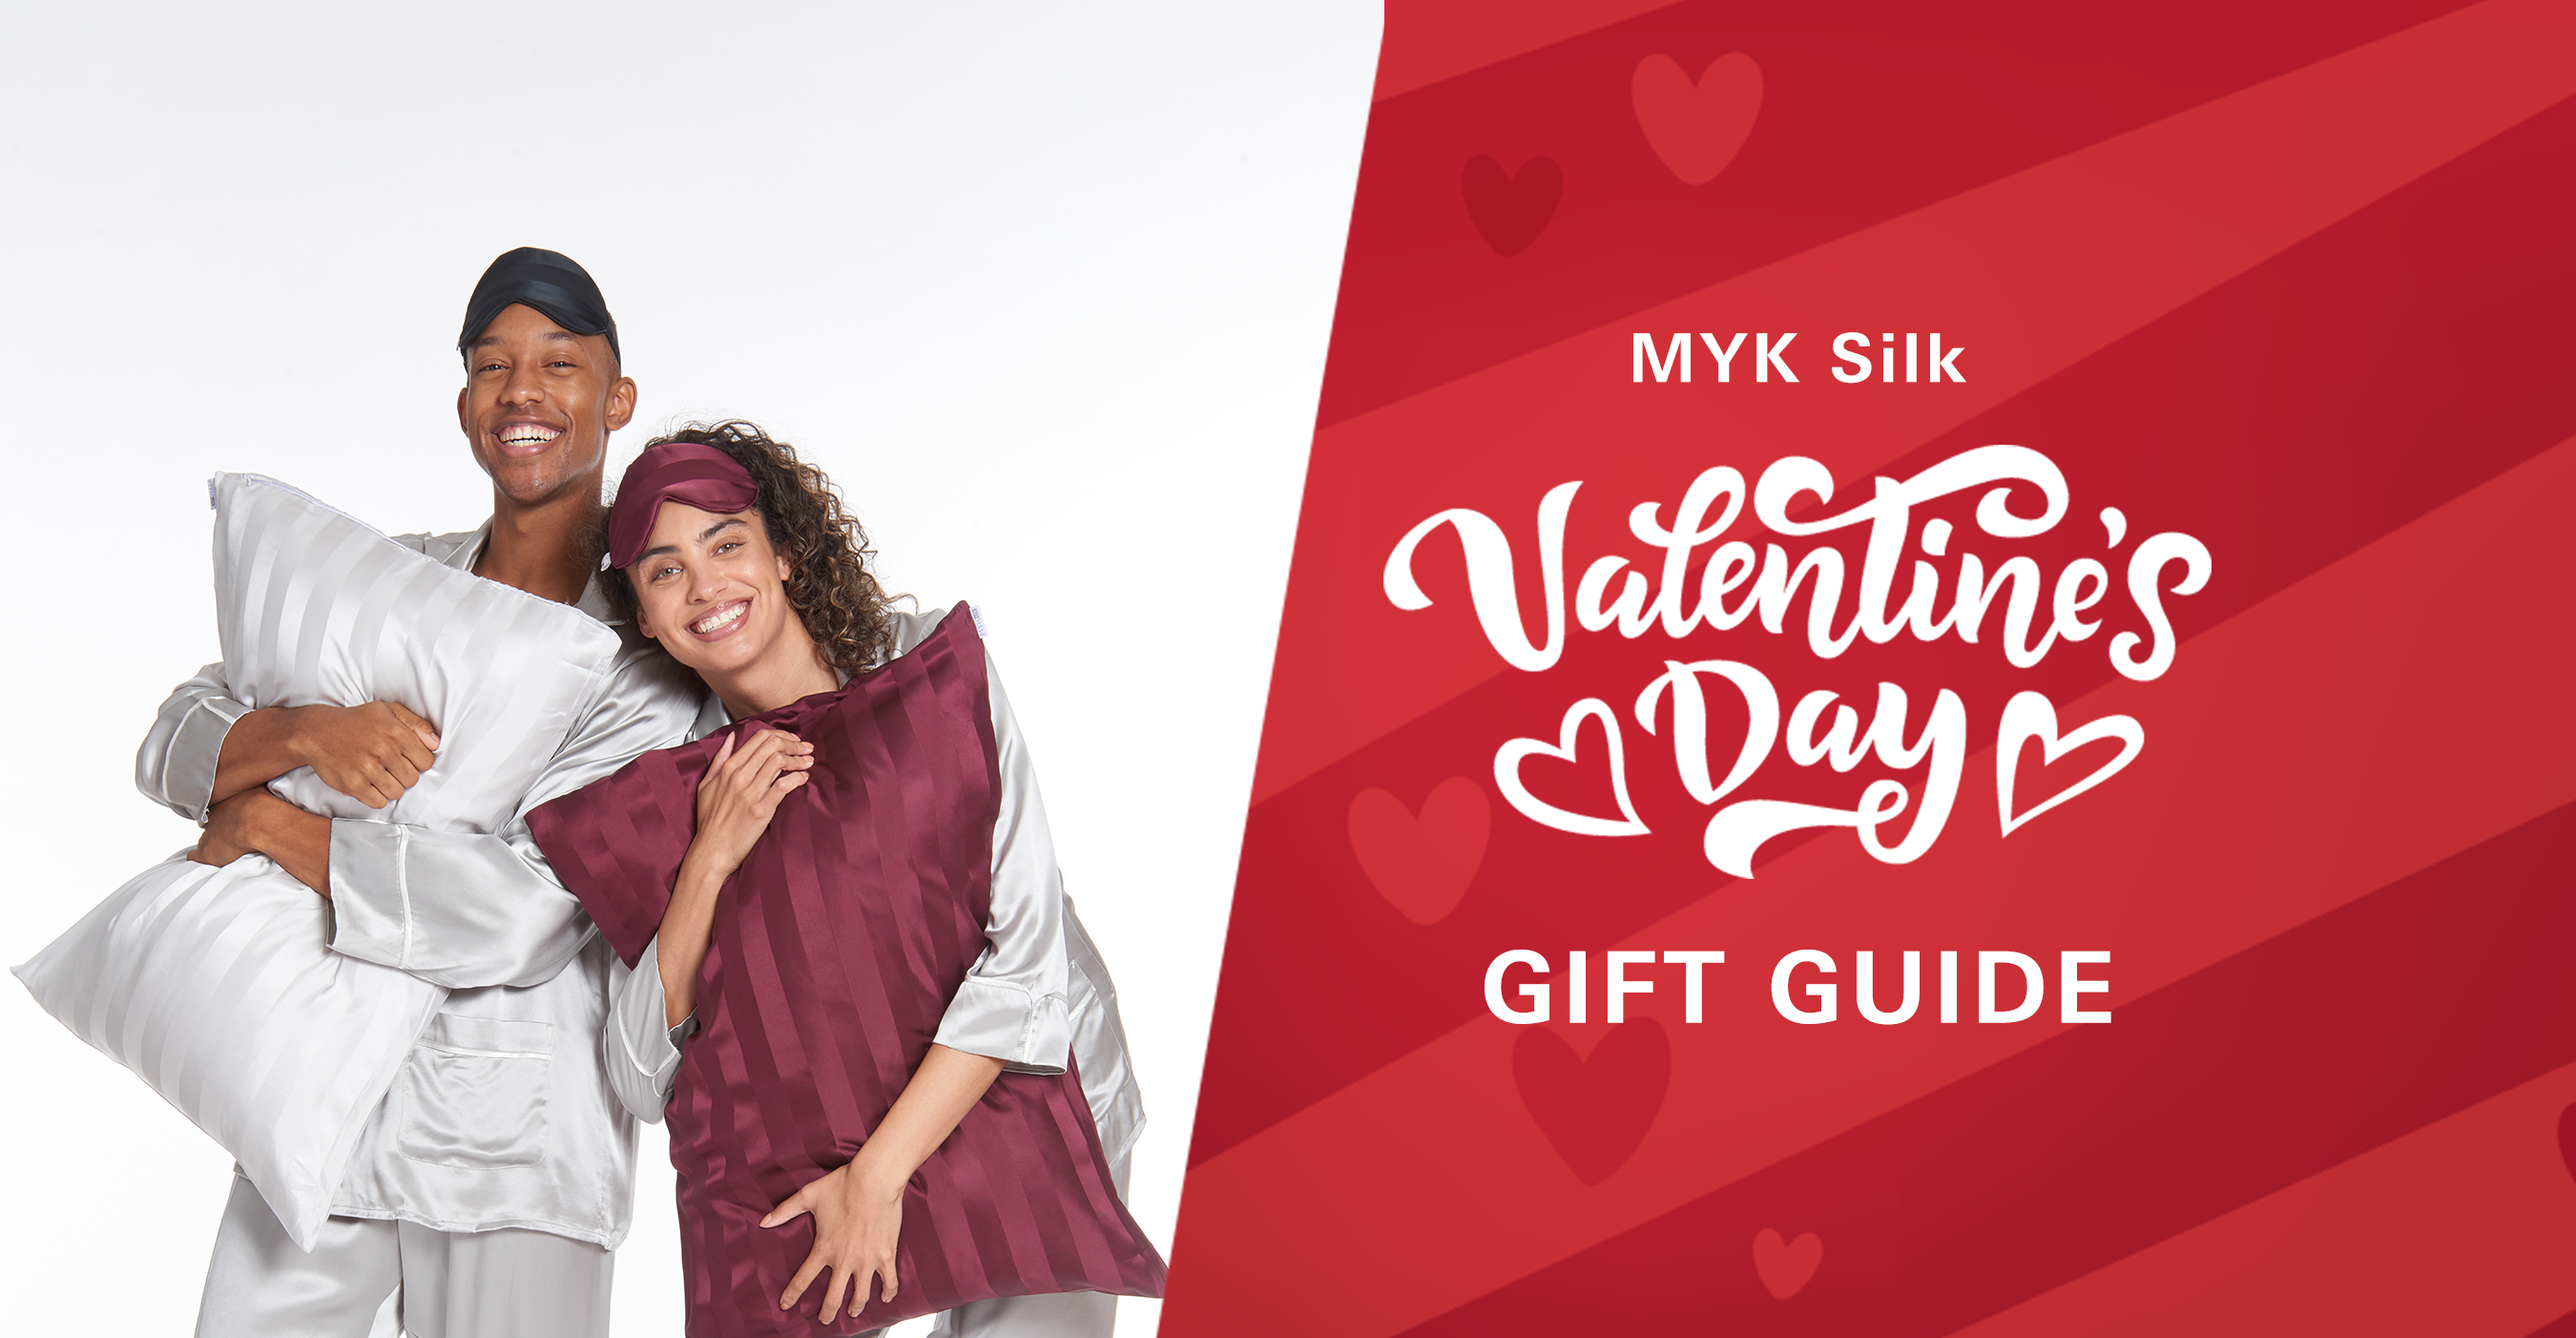 MYK Silk Valentine’s Day Gift Guide: Luxurious Valentine’s Day Gifts They’ll Love